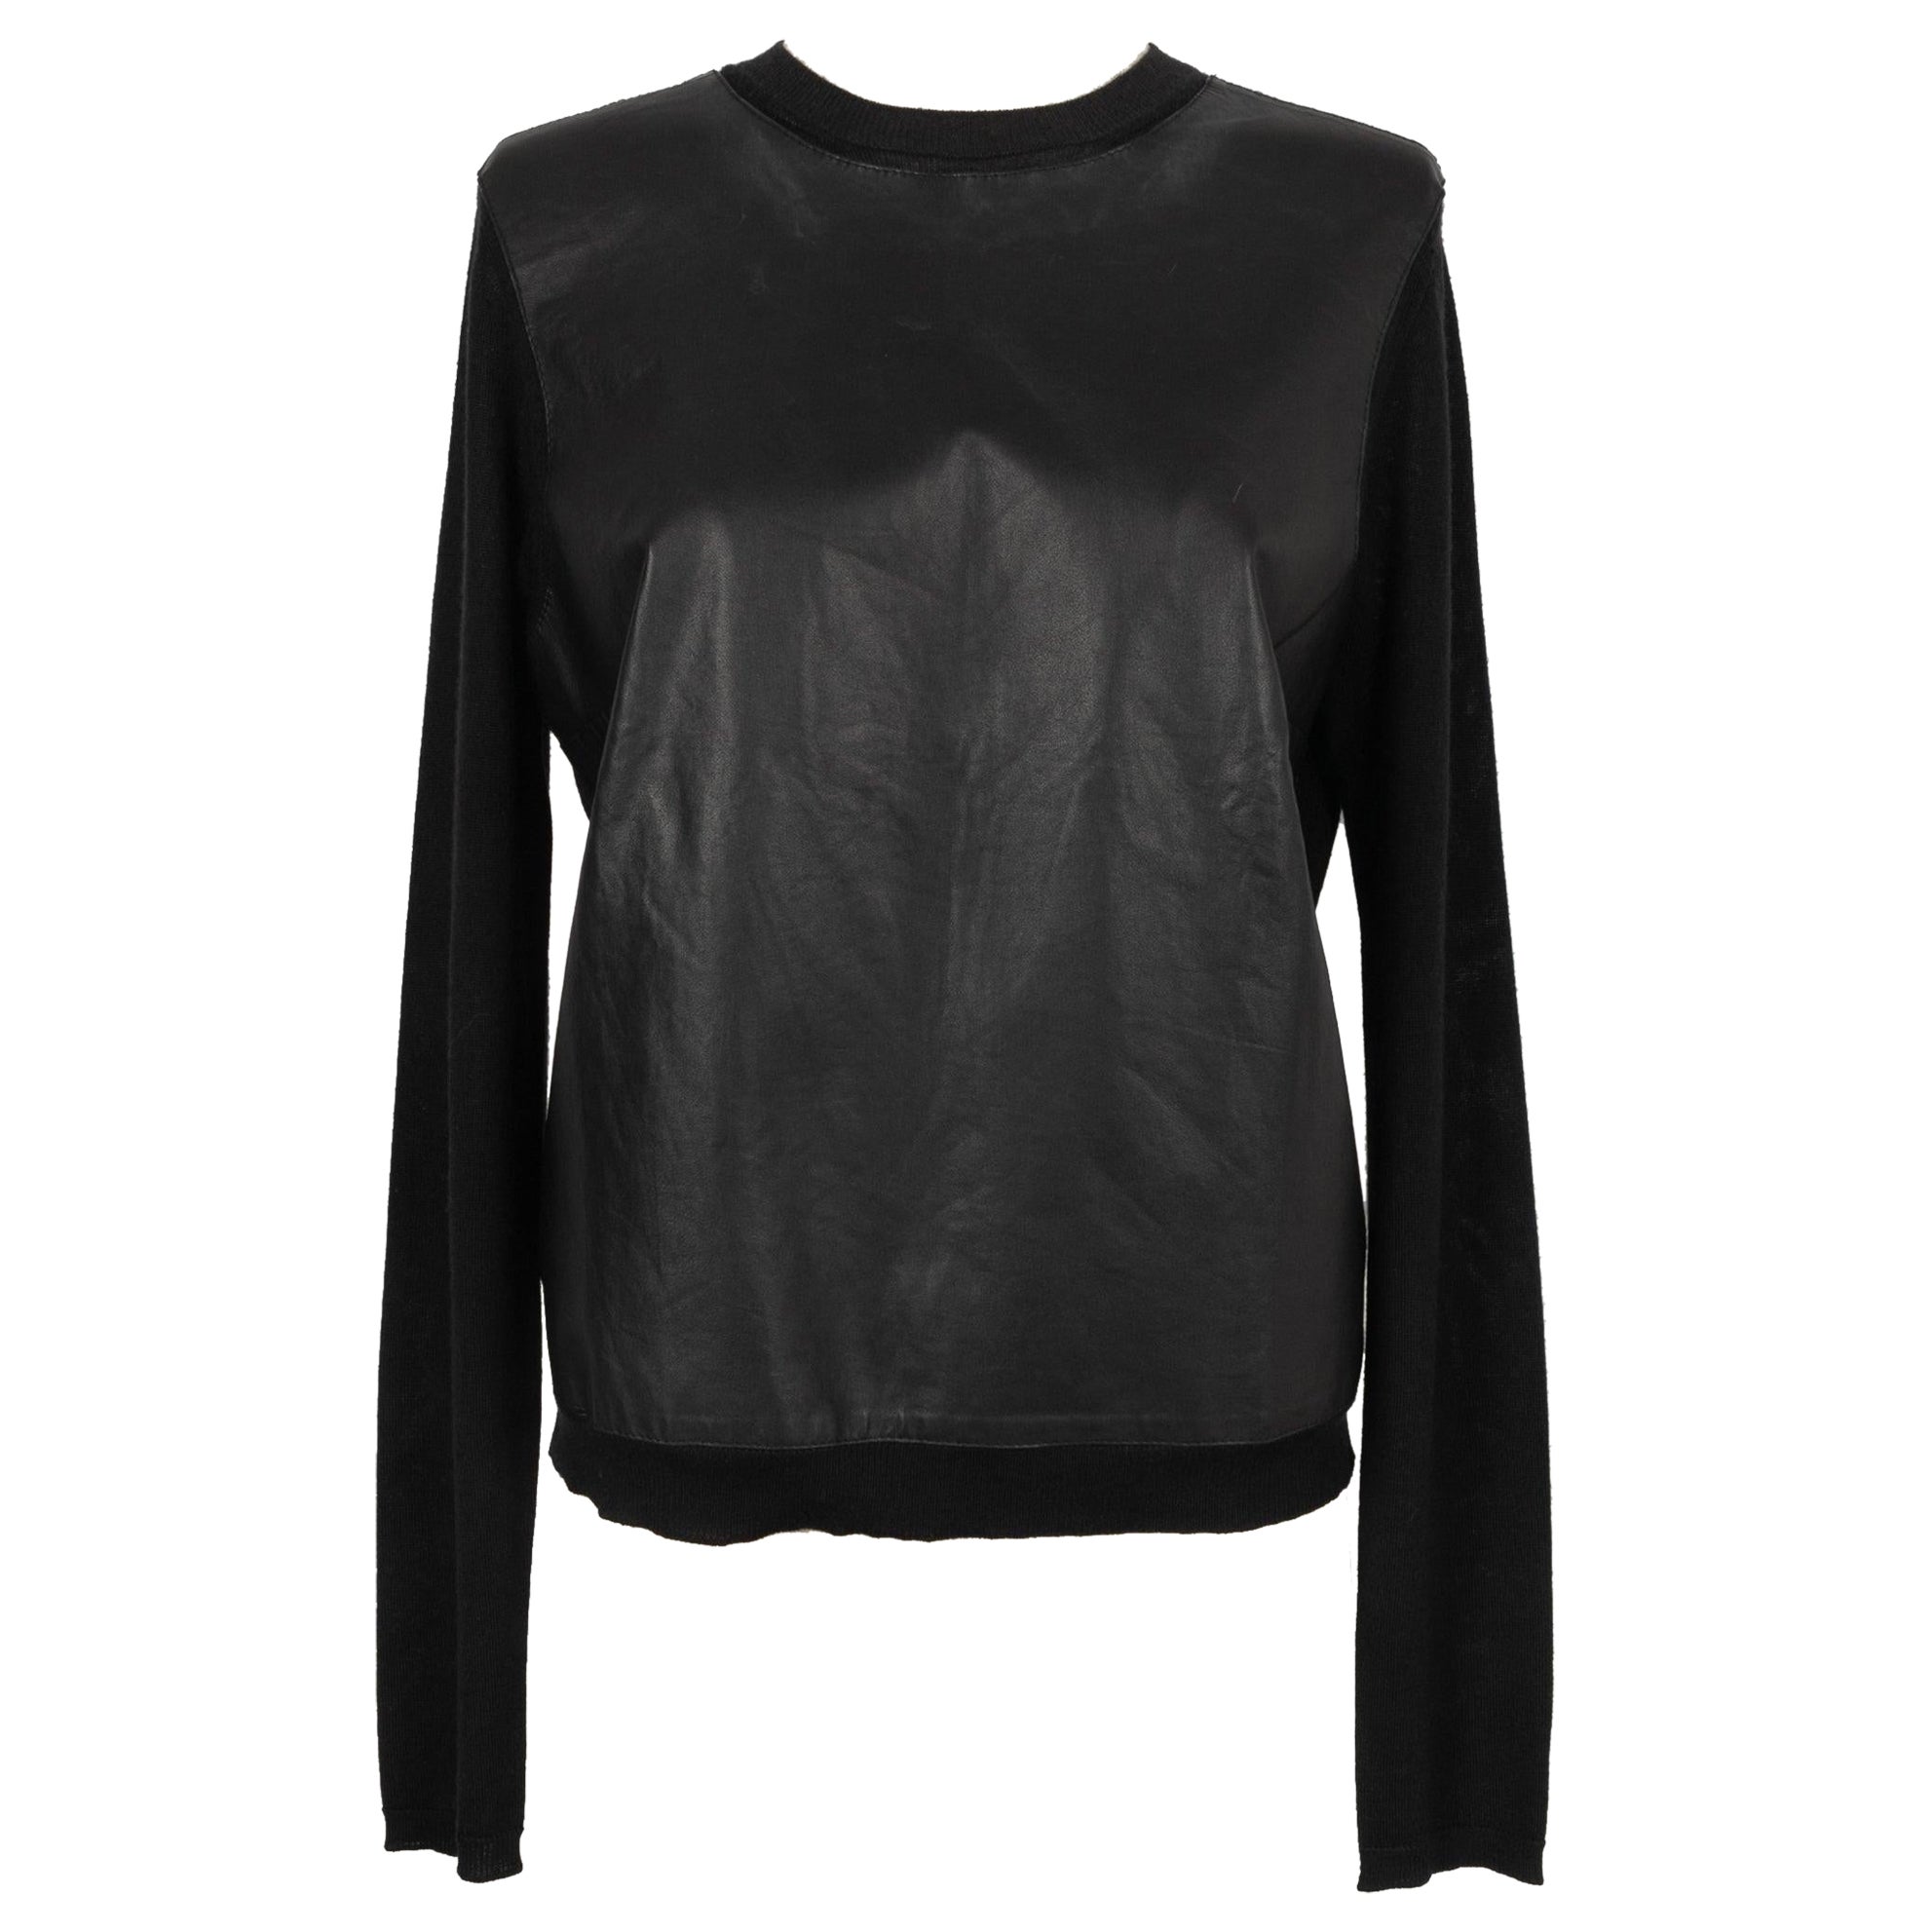 Christian Dior Black Lambskin and Cashmere Long-Sleeved Top 42FR For Sale